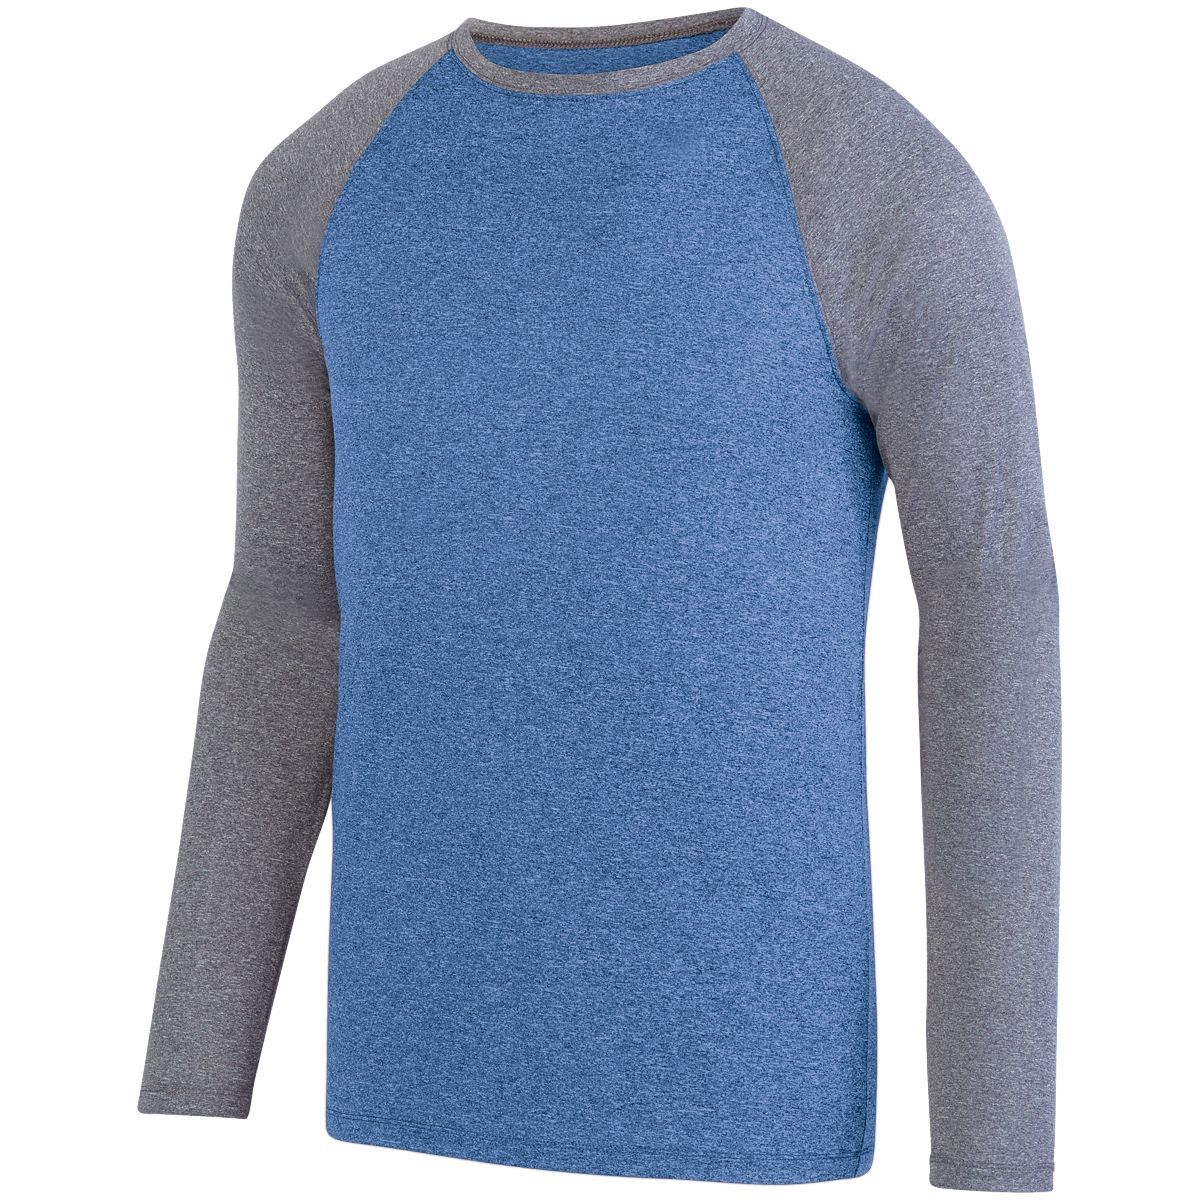 Augusta Sportswear Kinergy Two Color Long Sleeve Raglan Tee in Royal Heather/Graphite Heather  -Part of the Adult, Adult-Tee-Shirt, T-Shirts, Augusta-Products, Shirts product lines at KanaleyCreations.com